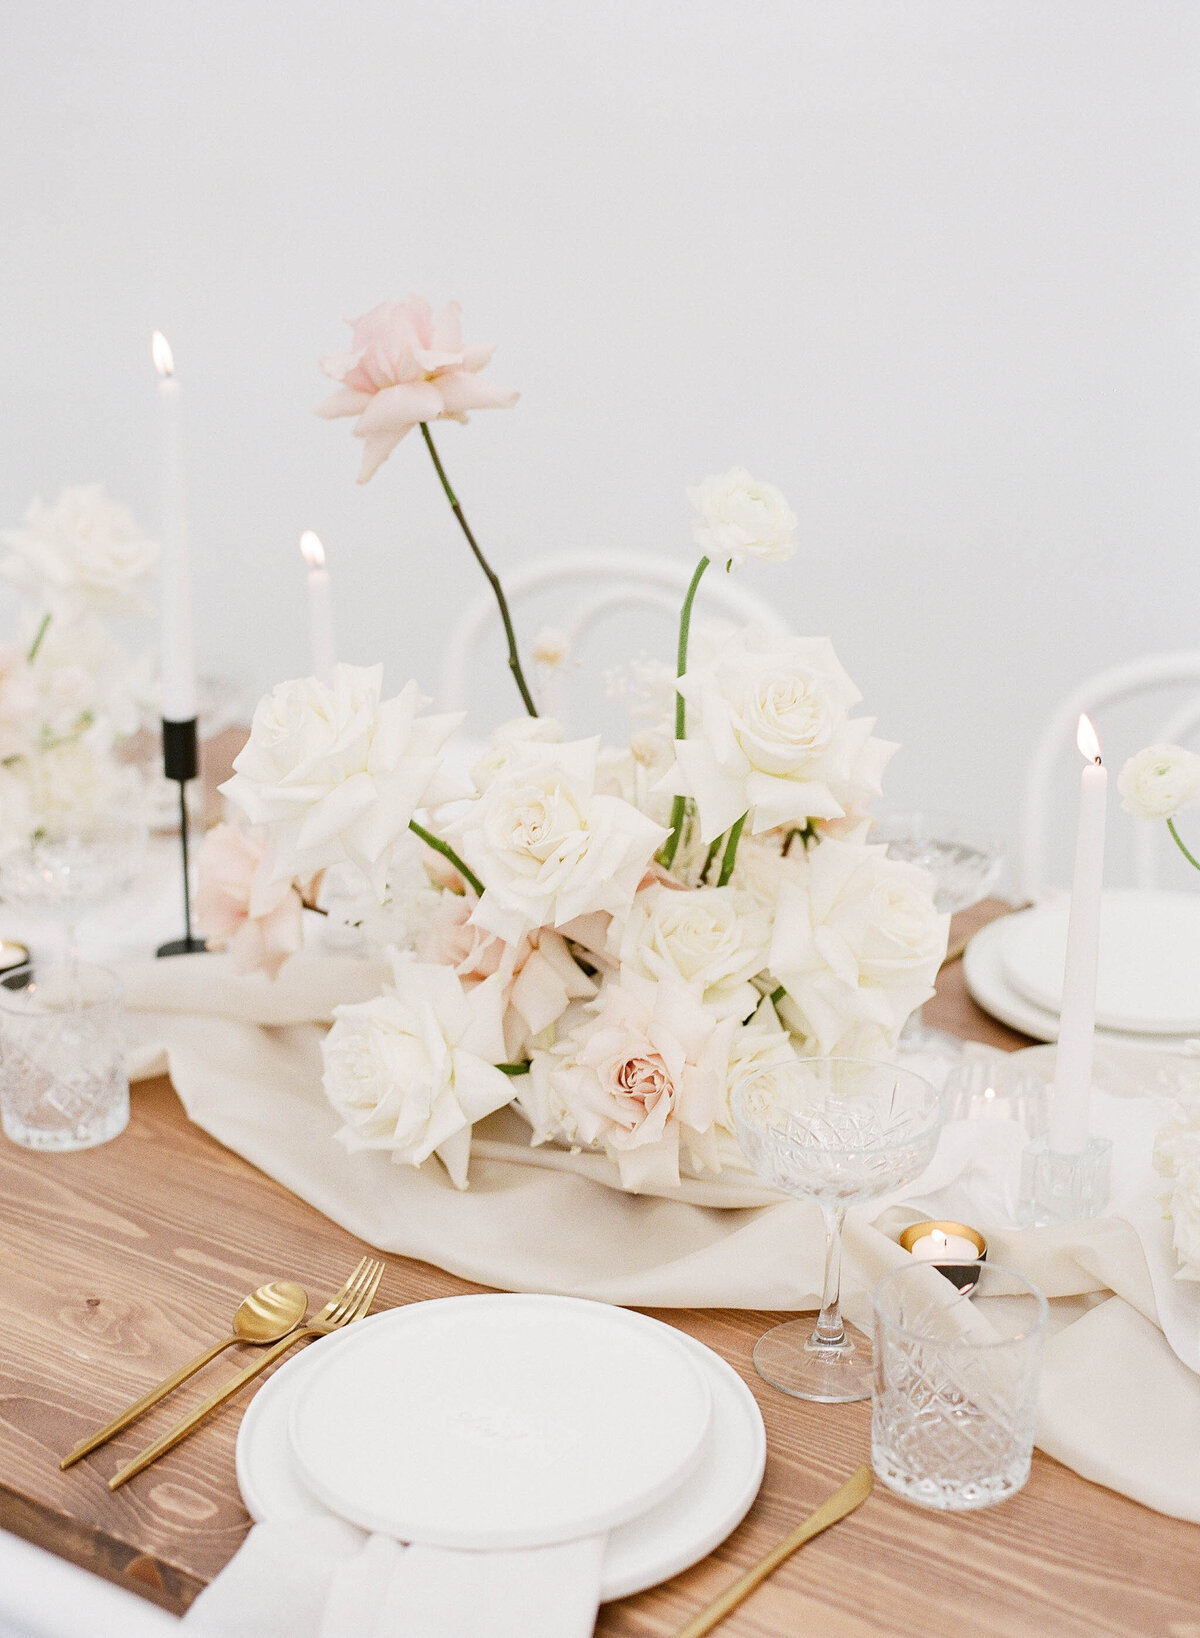 reception table setting details